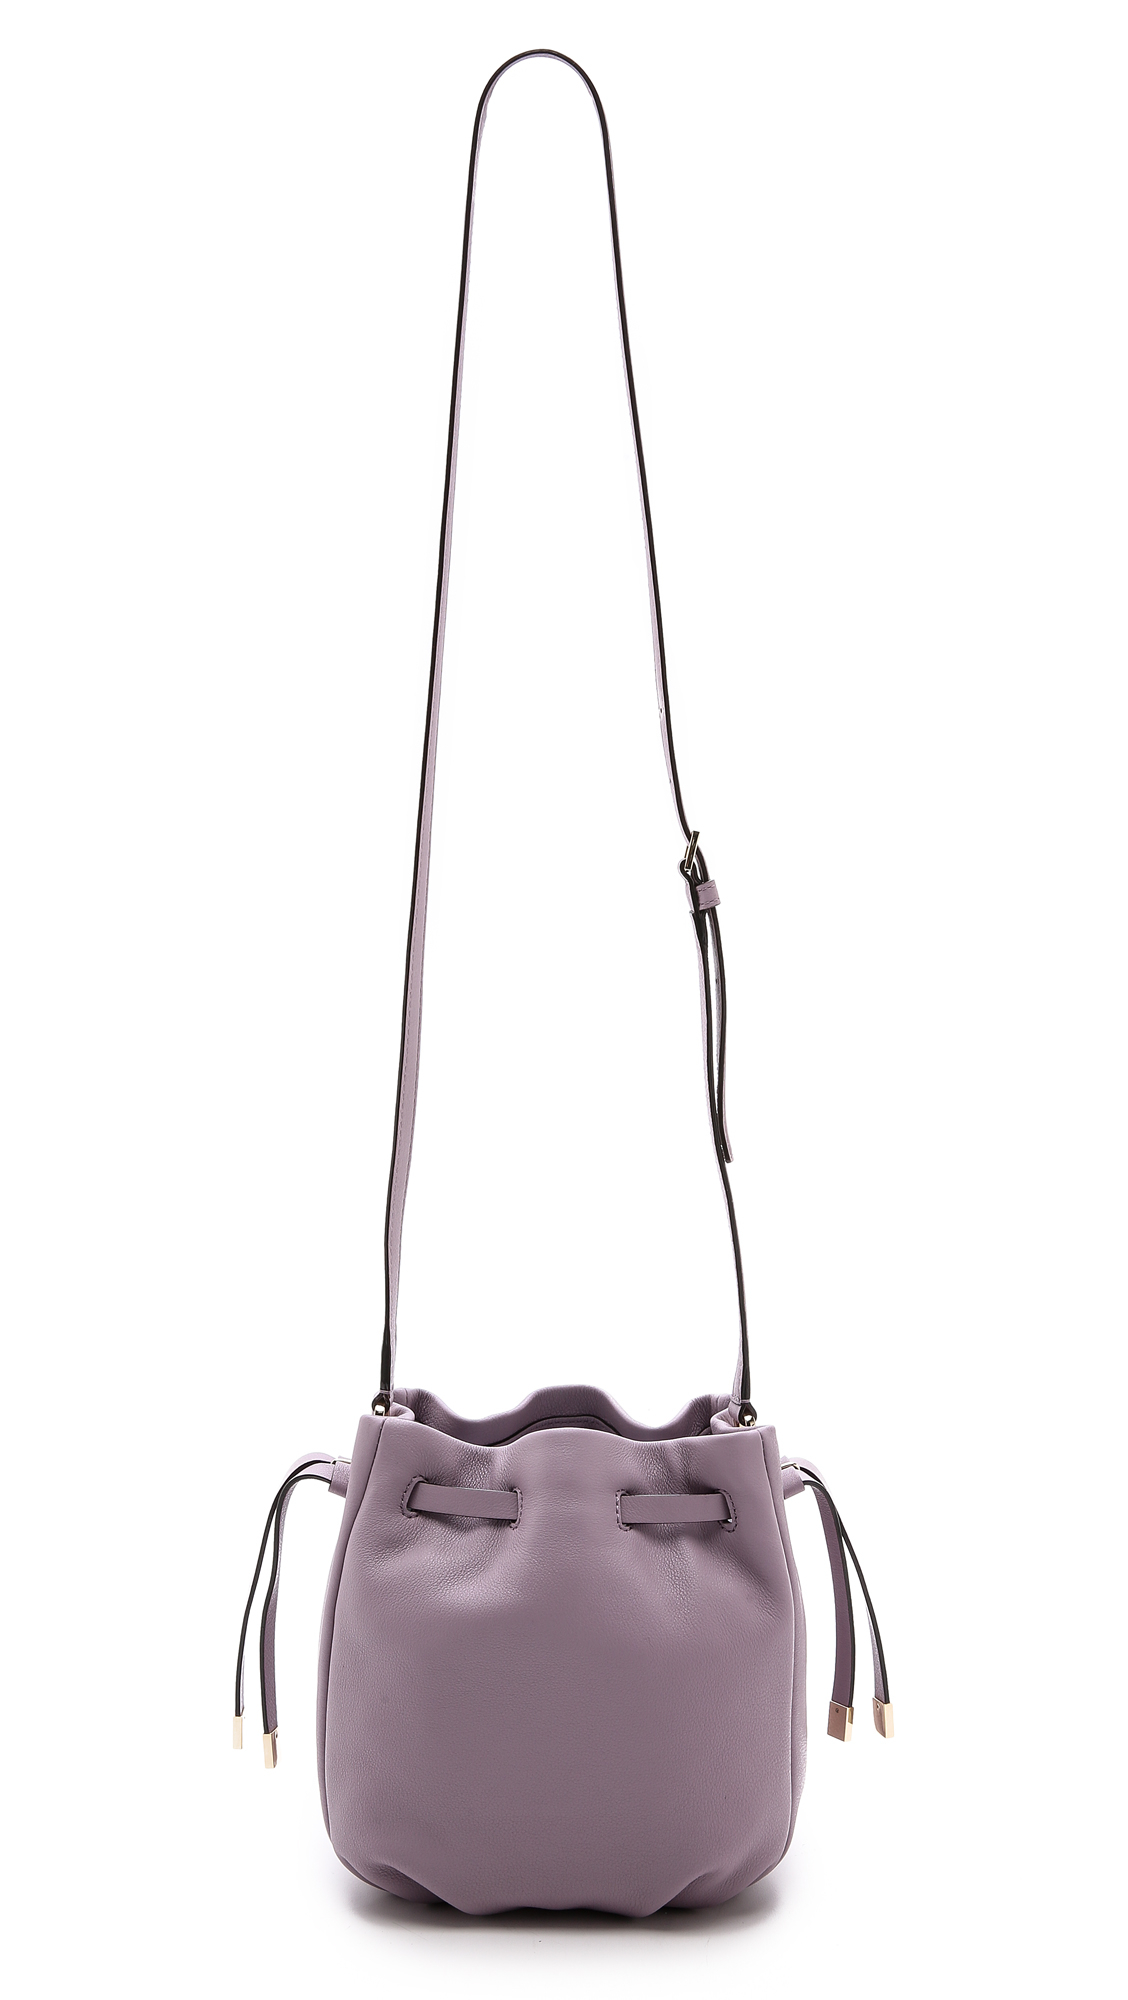 Kate Spade Kacey Lane Small Poppy Bucket Bag - Lilac Bliss in Pink - Lyst